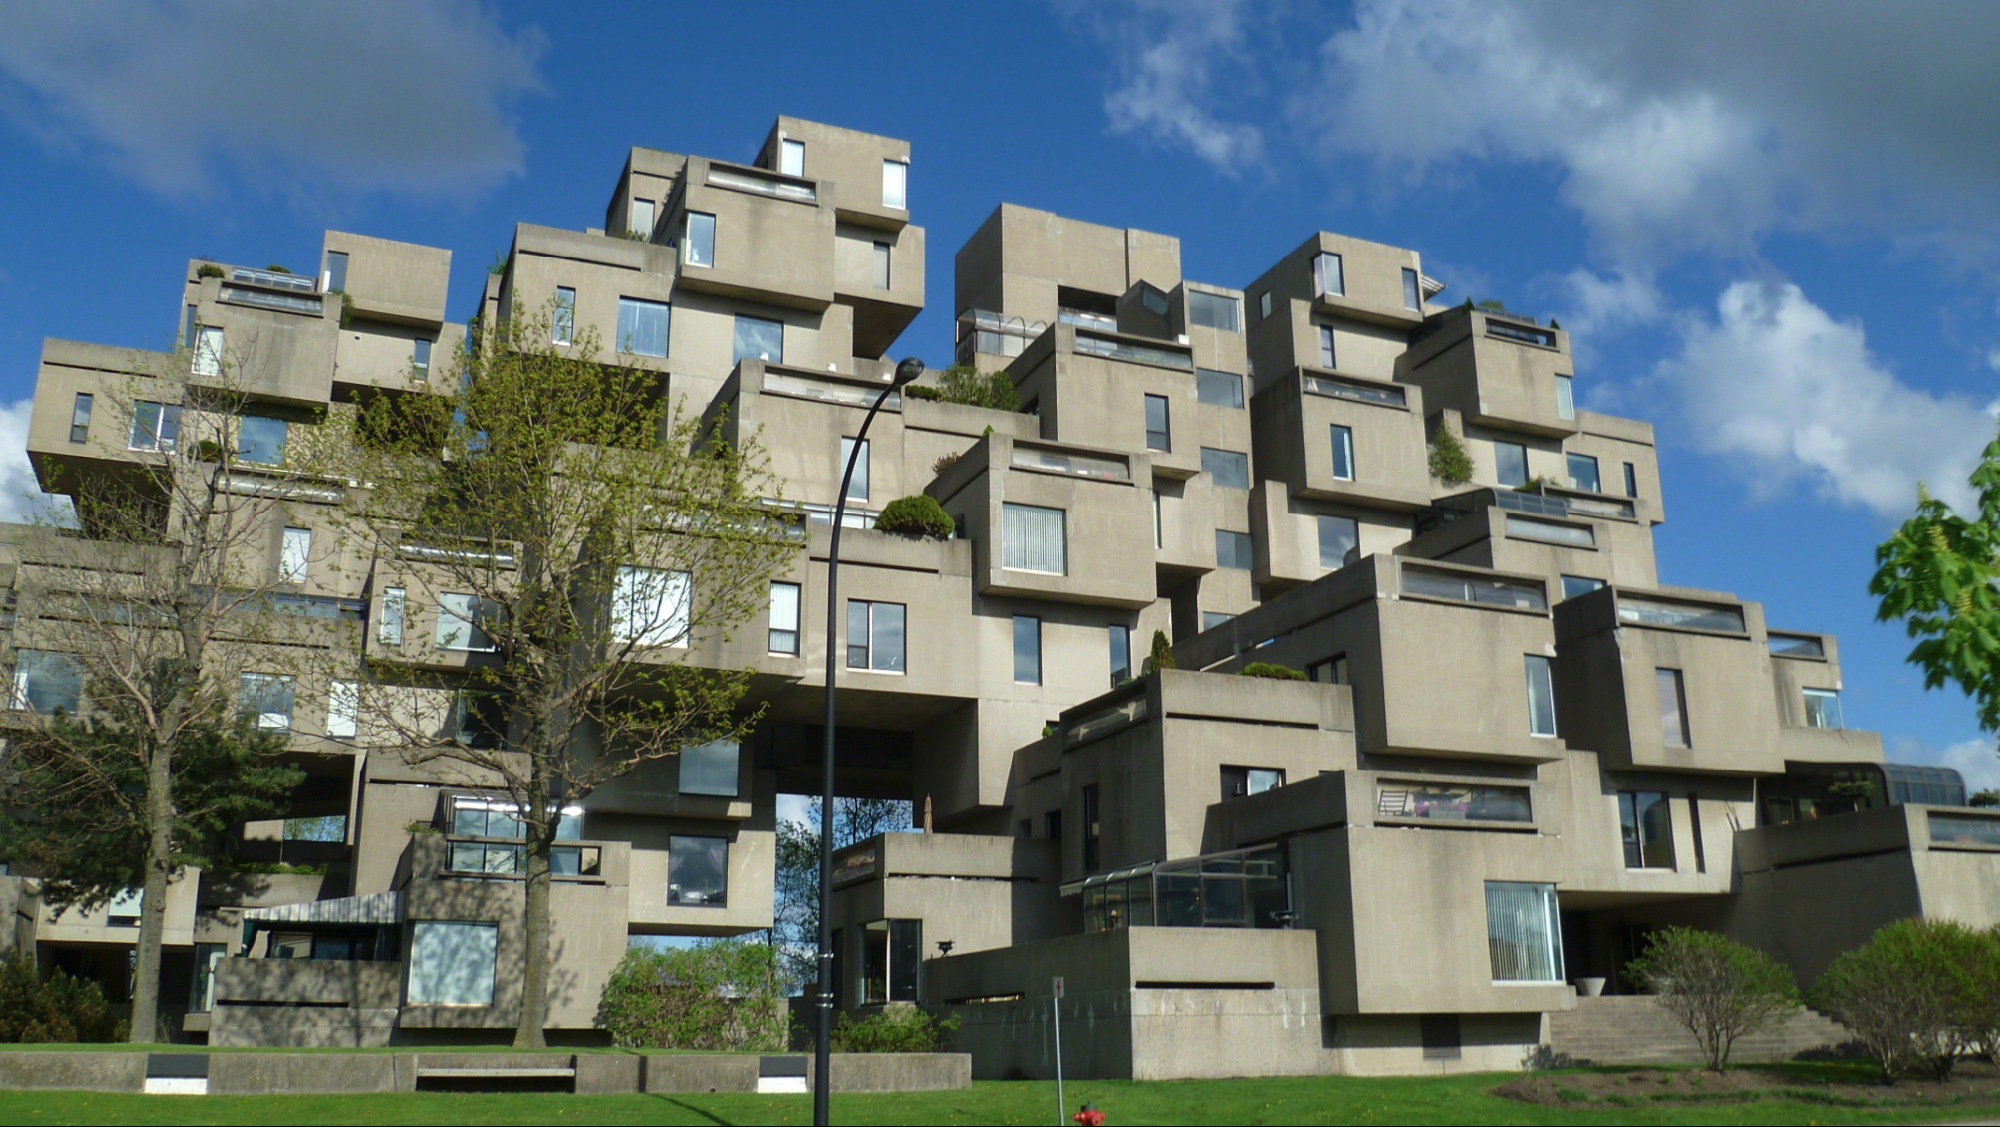 A concrete building made of many overlapping cubes.